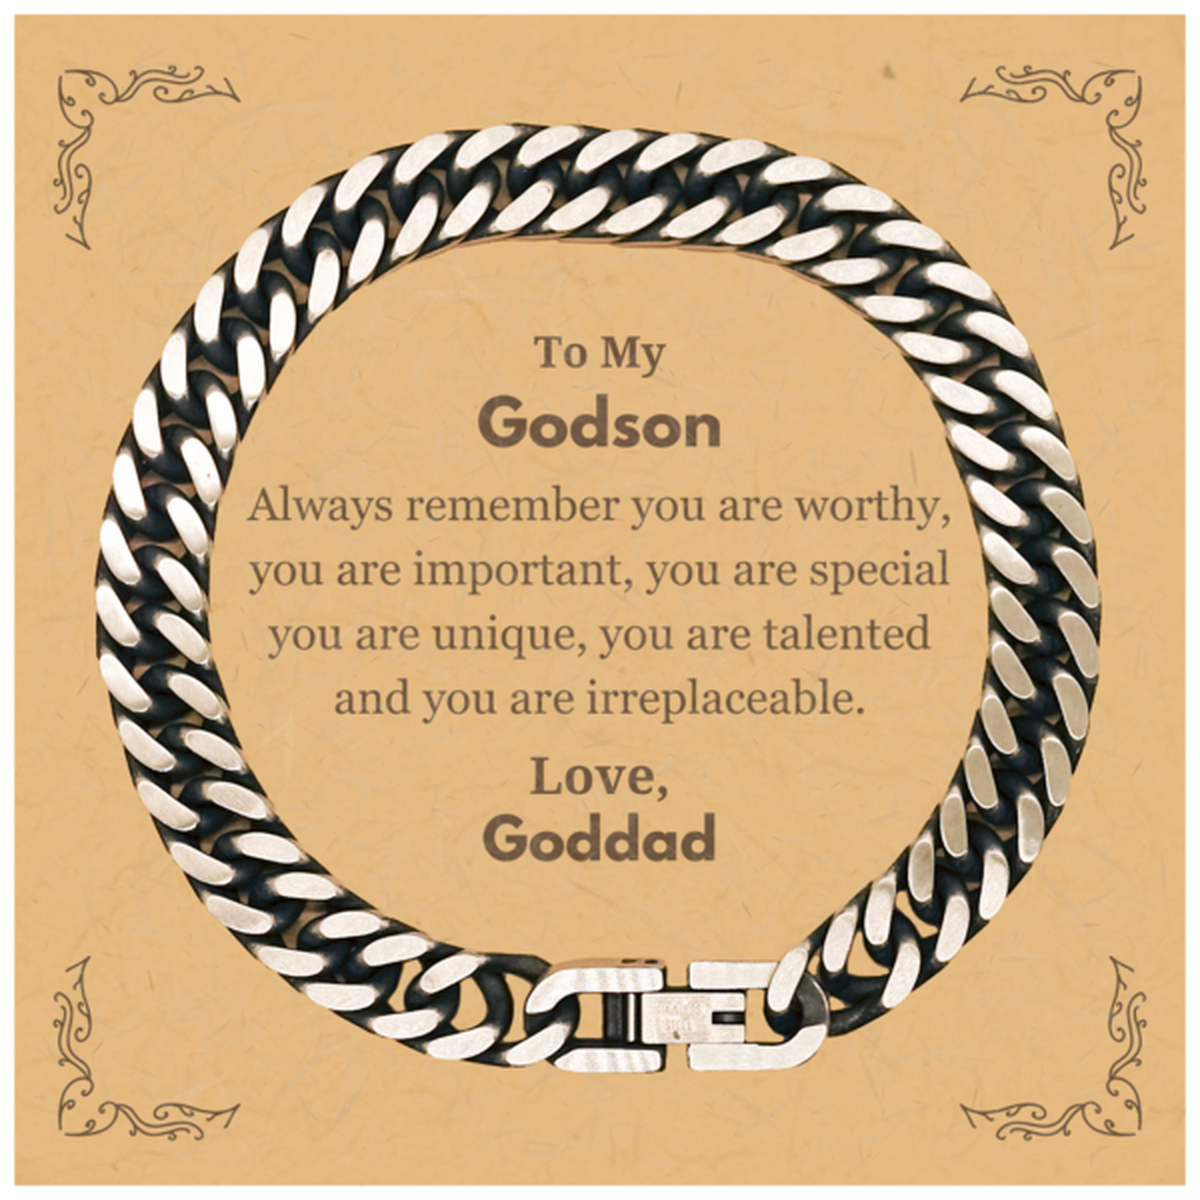 Godson Birthday Gifts from Goddad, Inspirational Cuban Link Chain Bracelet for Godson Christmas Graduation Gifts for Godson Always remember you are worthy, you are important. Love, Goddad